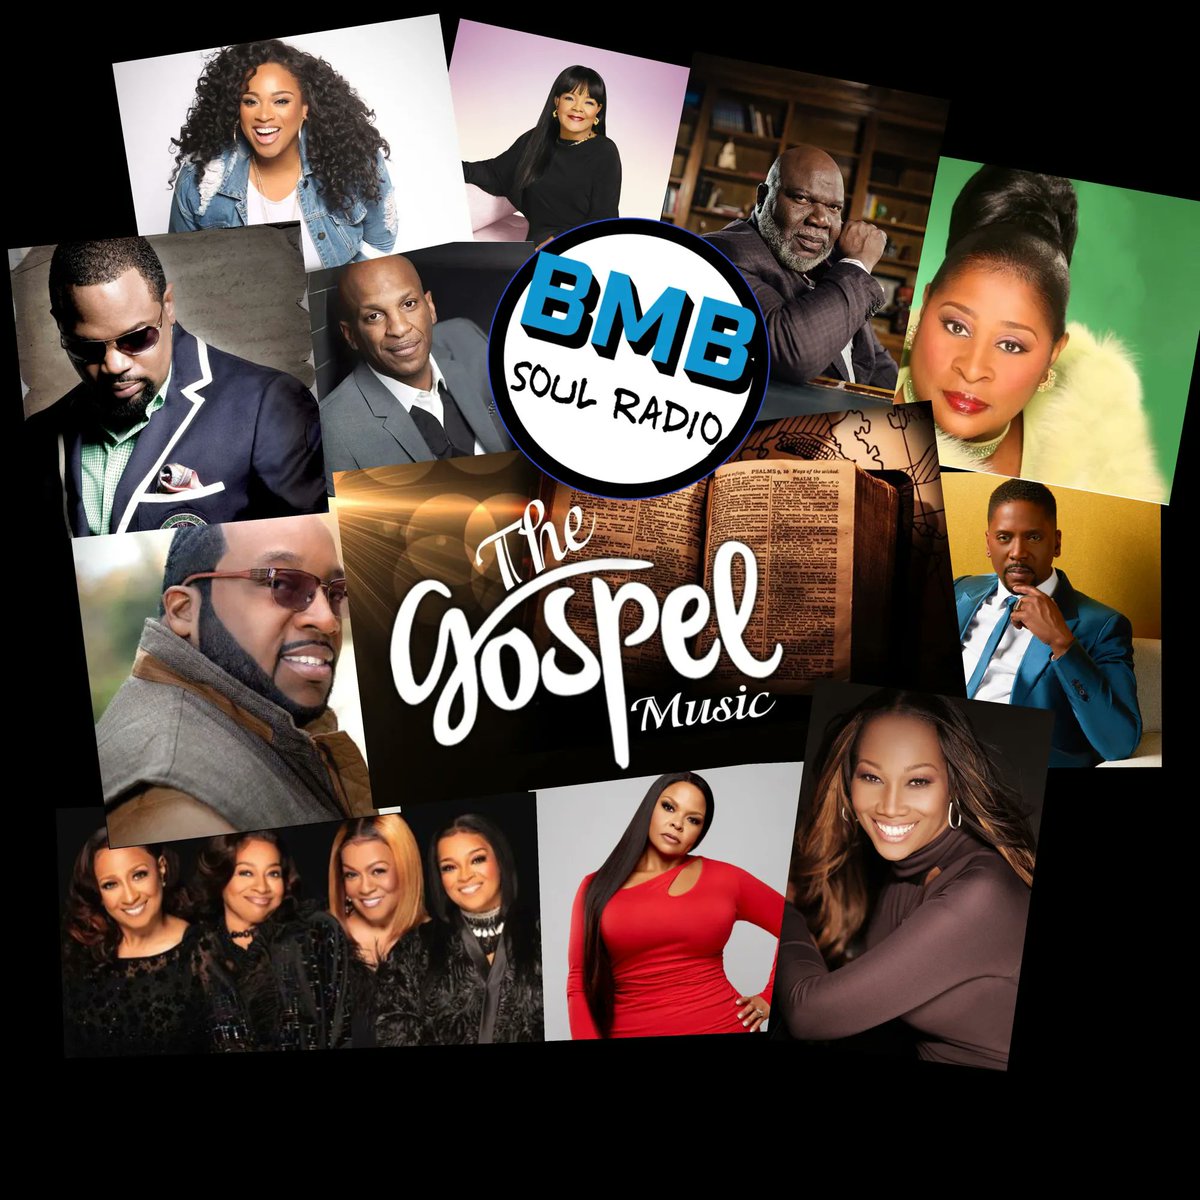 #NowPlaying On BMB Soul Radio 365   
>Gospel Music from 7am-1pm Central 
Bmbempower.com #music #olschool #newjackswing #rnb #gospel #smoothjazz #funk #hiphop #oldschool
>Website: bmbempower.com
»Live 365: live365.com/station/a65425
»TuneIn: tun.in/sfFj8